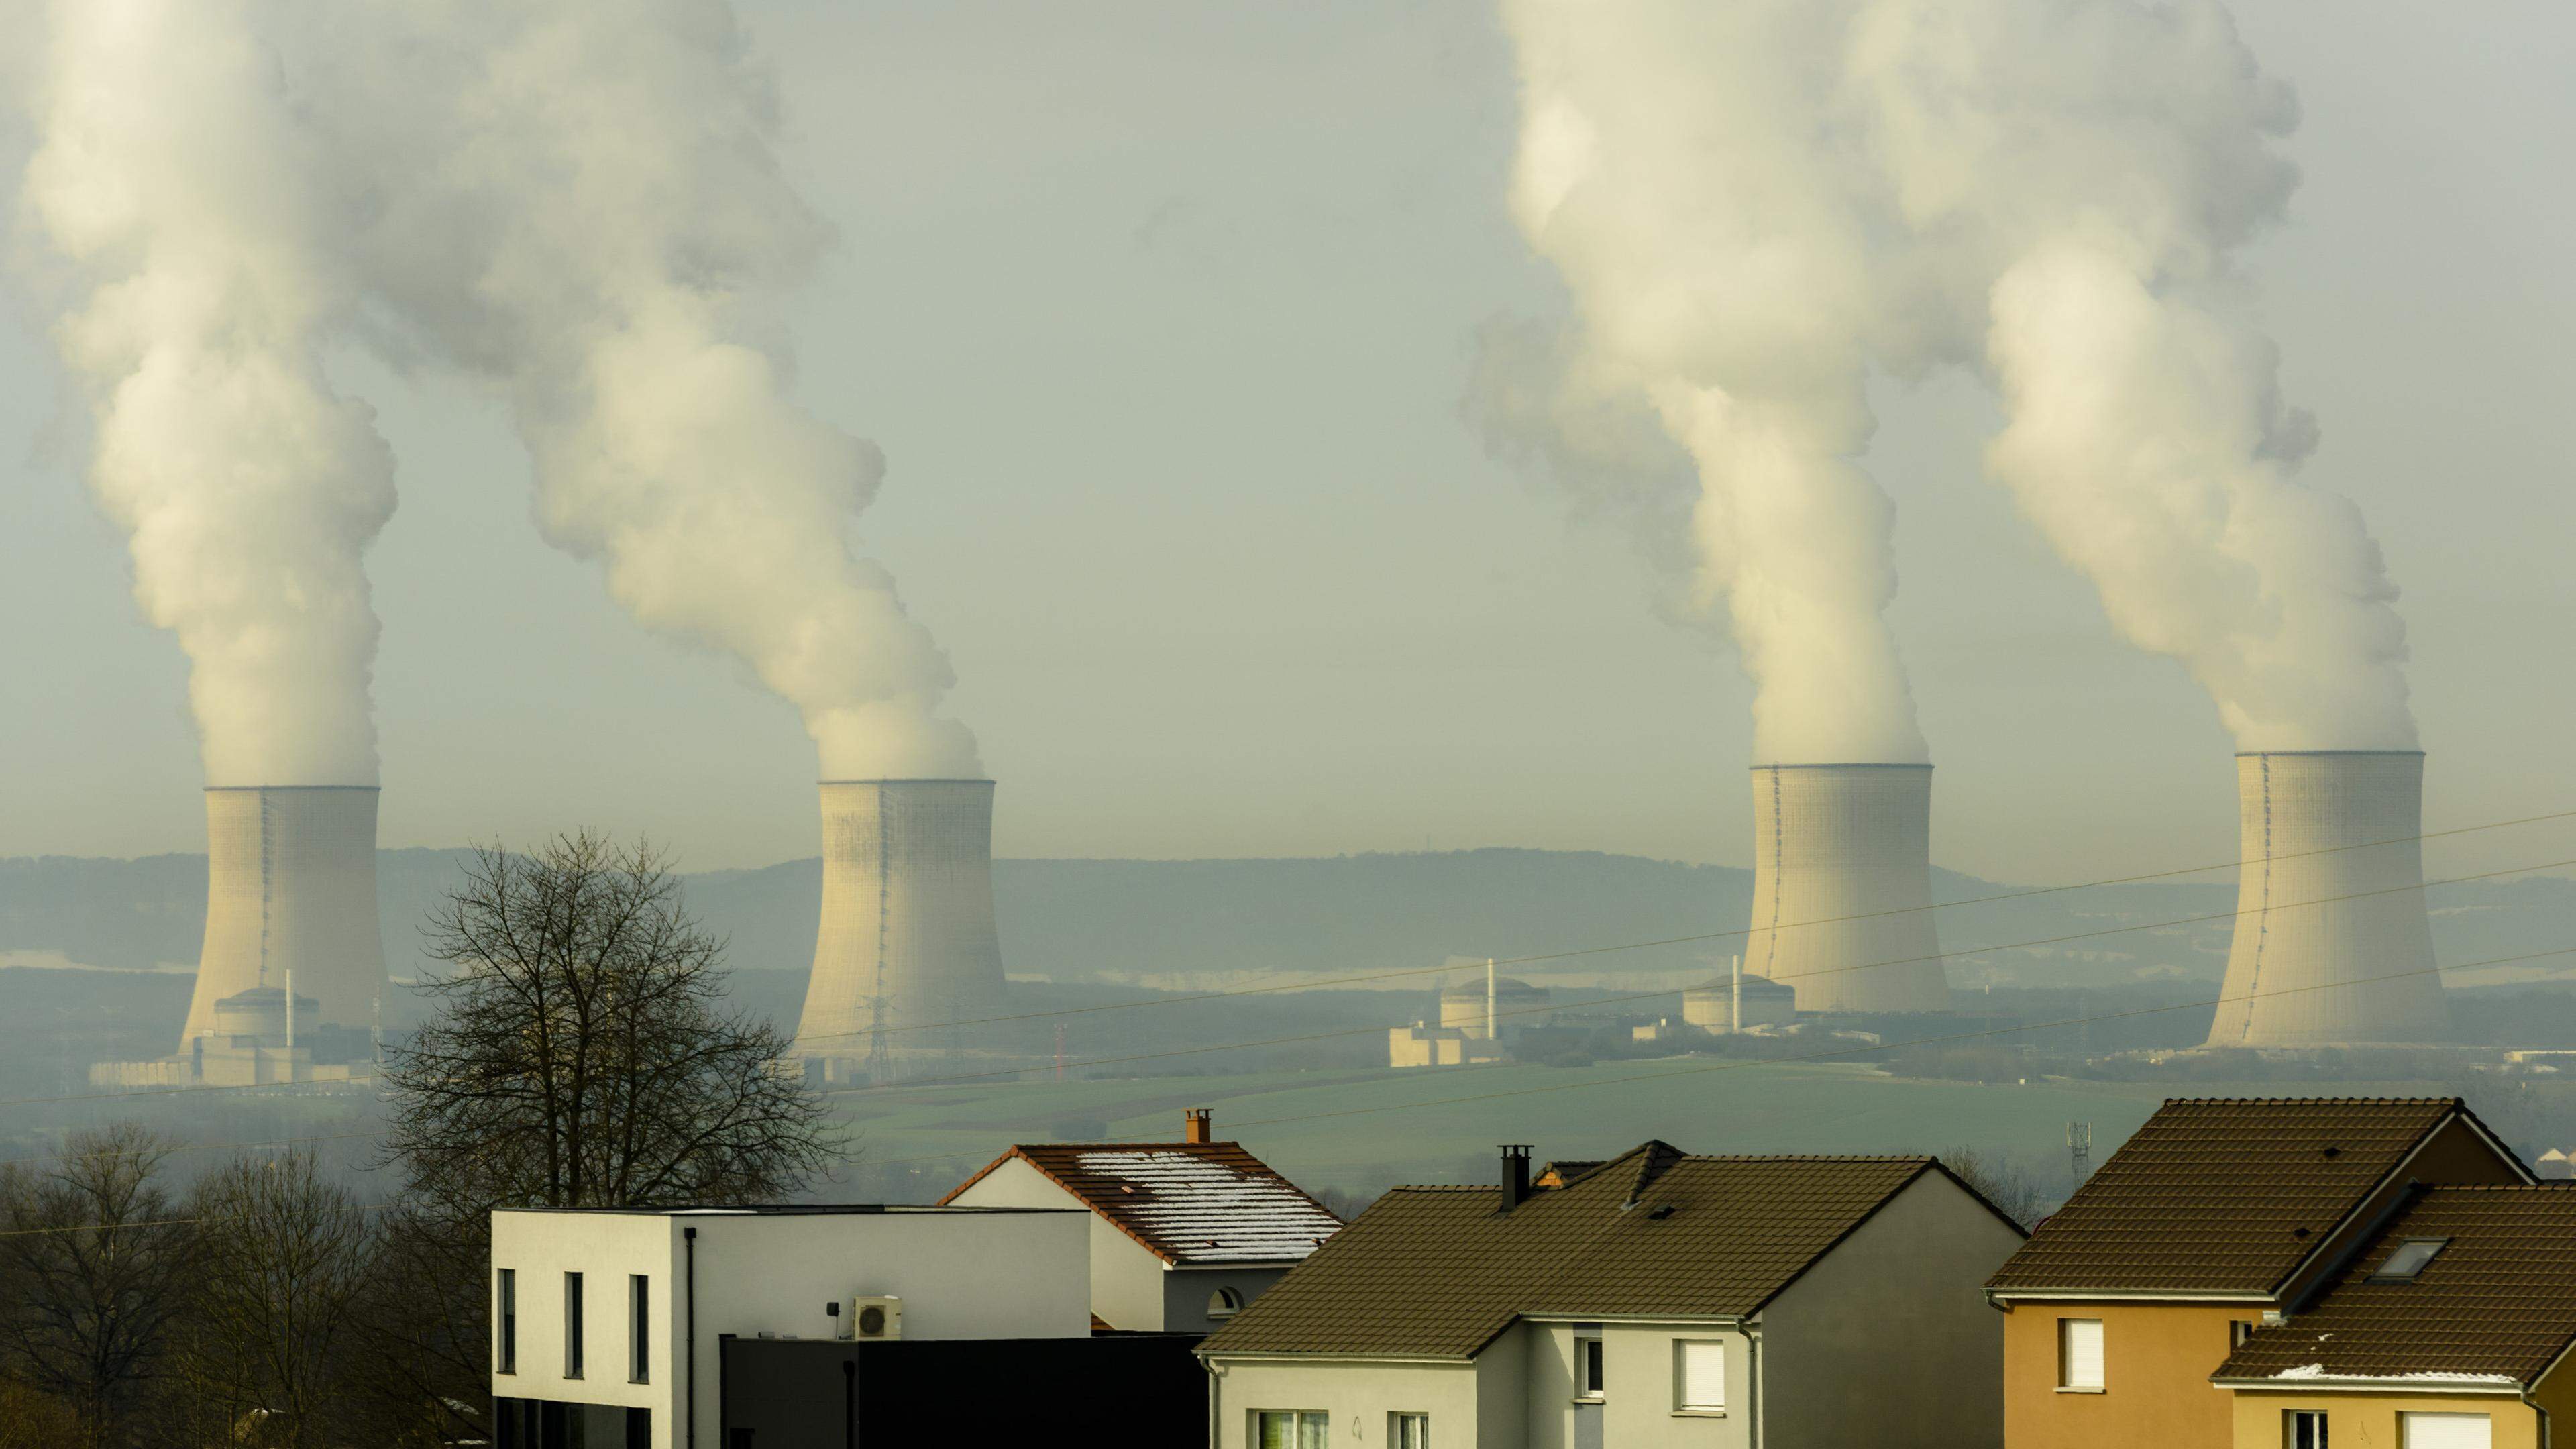 The nuclear power plant in Cattenom is visible from afar. Greenpeace is calling on the Luxembourg government to take action to decommission the plant. 